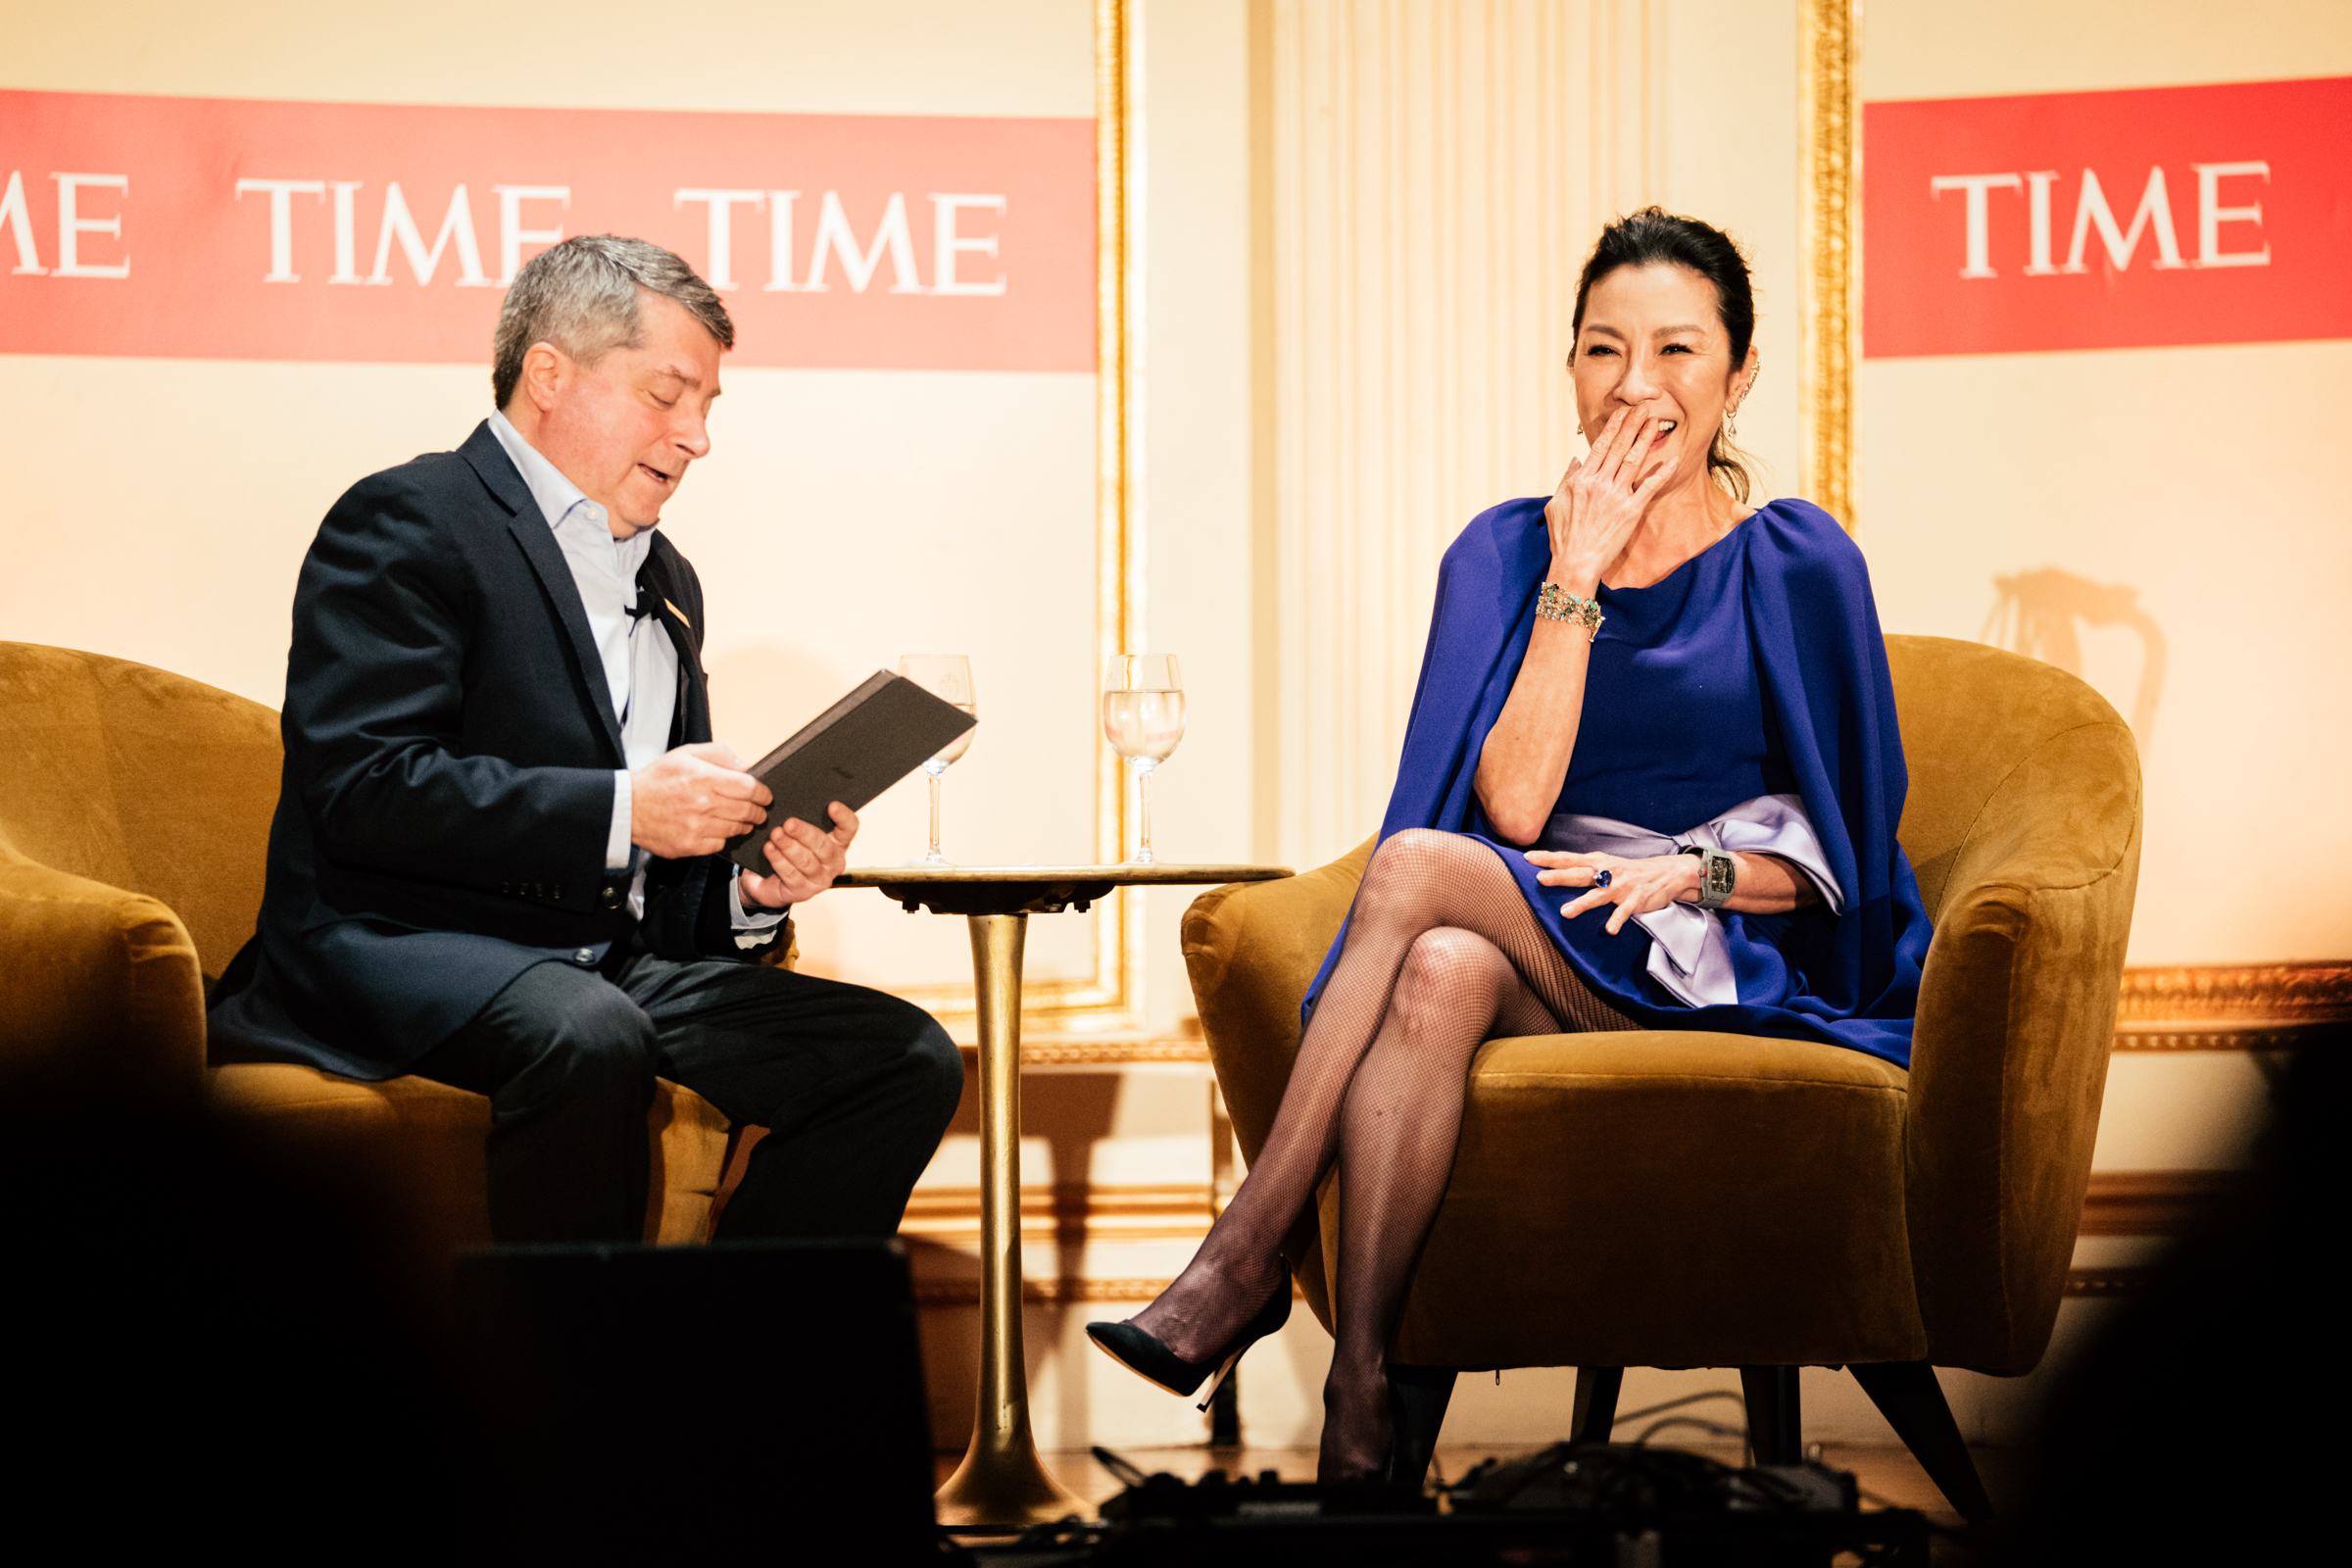 TIME’s 2022 Icon of the Year Michelle Yeoh onstage at the TIME 2022 Person of the Year reception, at The Plaza Hotel in New York City, on Dec. 8, 2022.